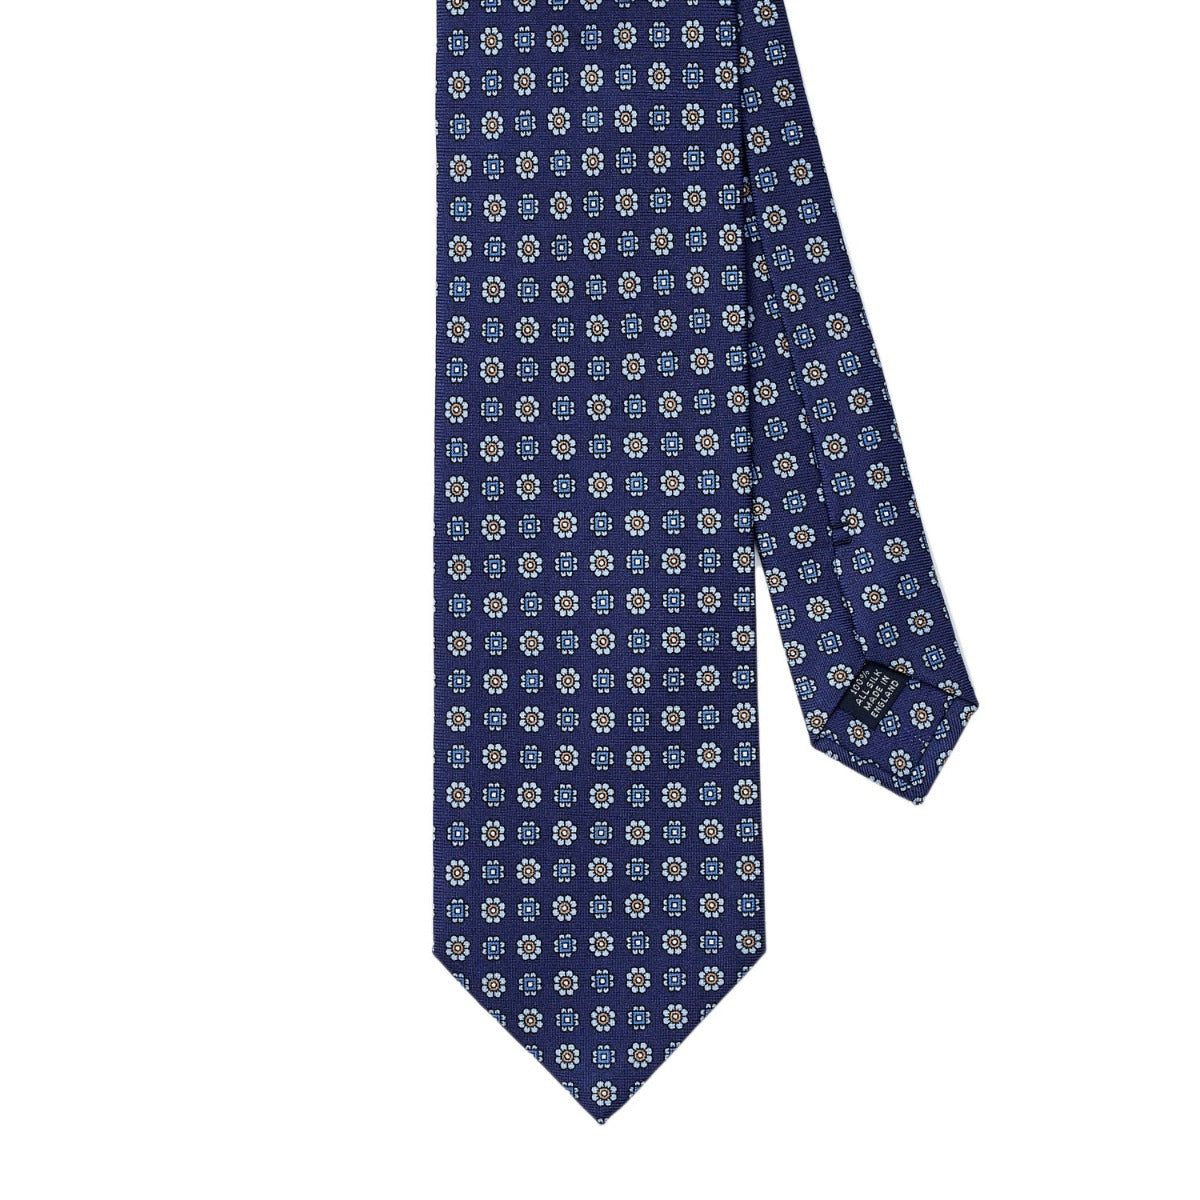 A Sovereign Grade Navy Floral 36oz Printed Silk Tie, made by KirbyAllison.com, with a pattern on it, made from 100% English silk.